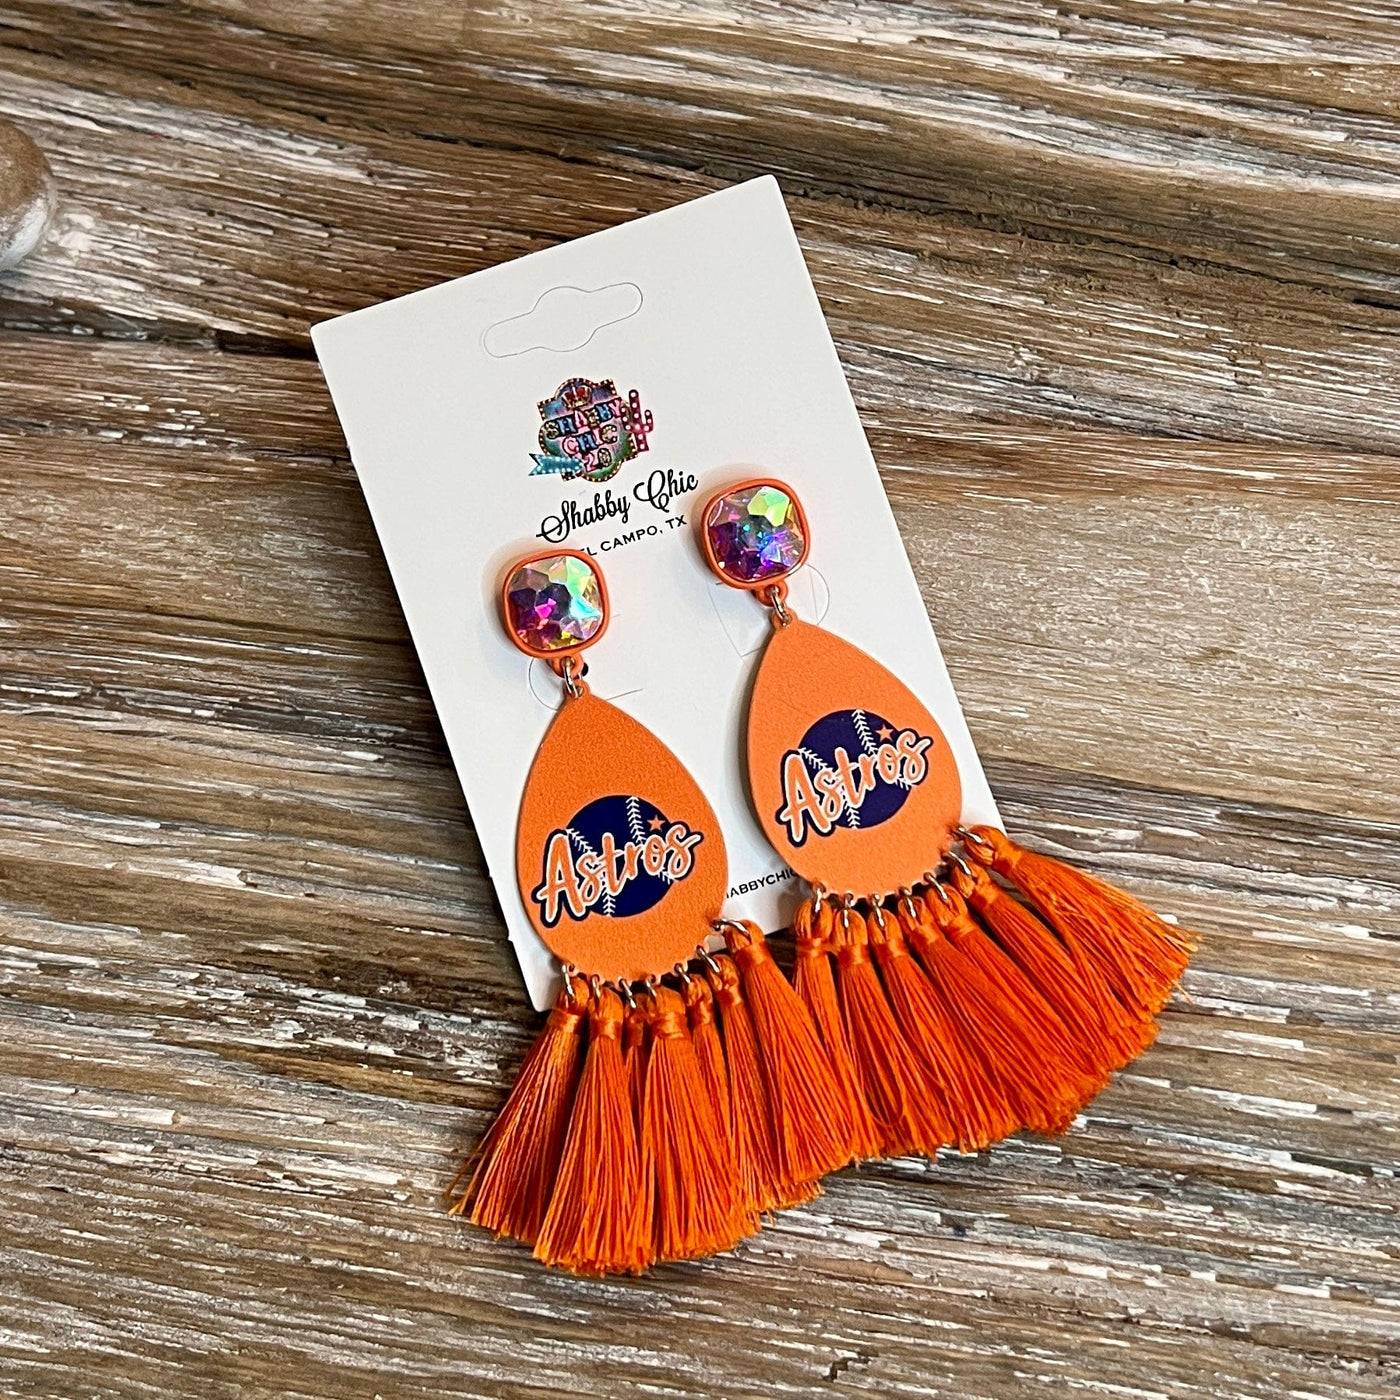 Orange and Navy Baseball Earrings Shabby Chic Boutique and Tanning Salon